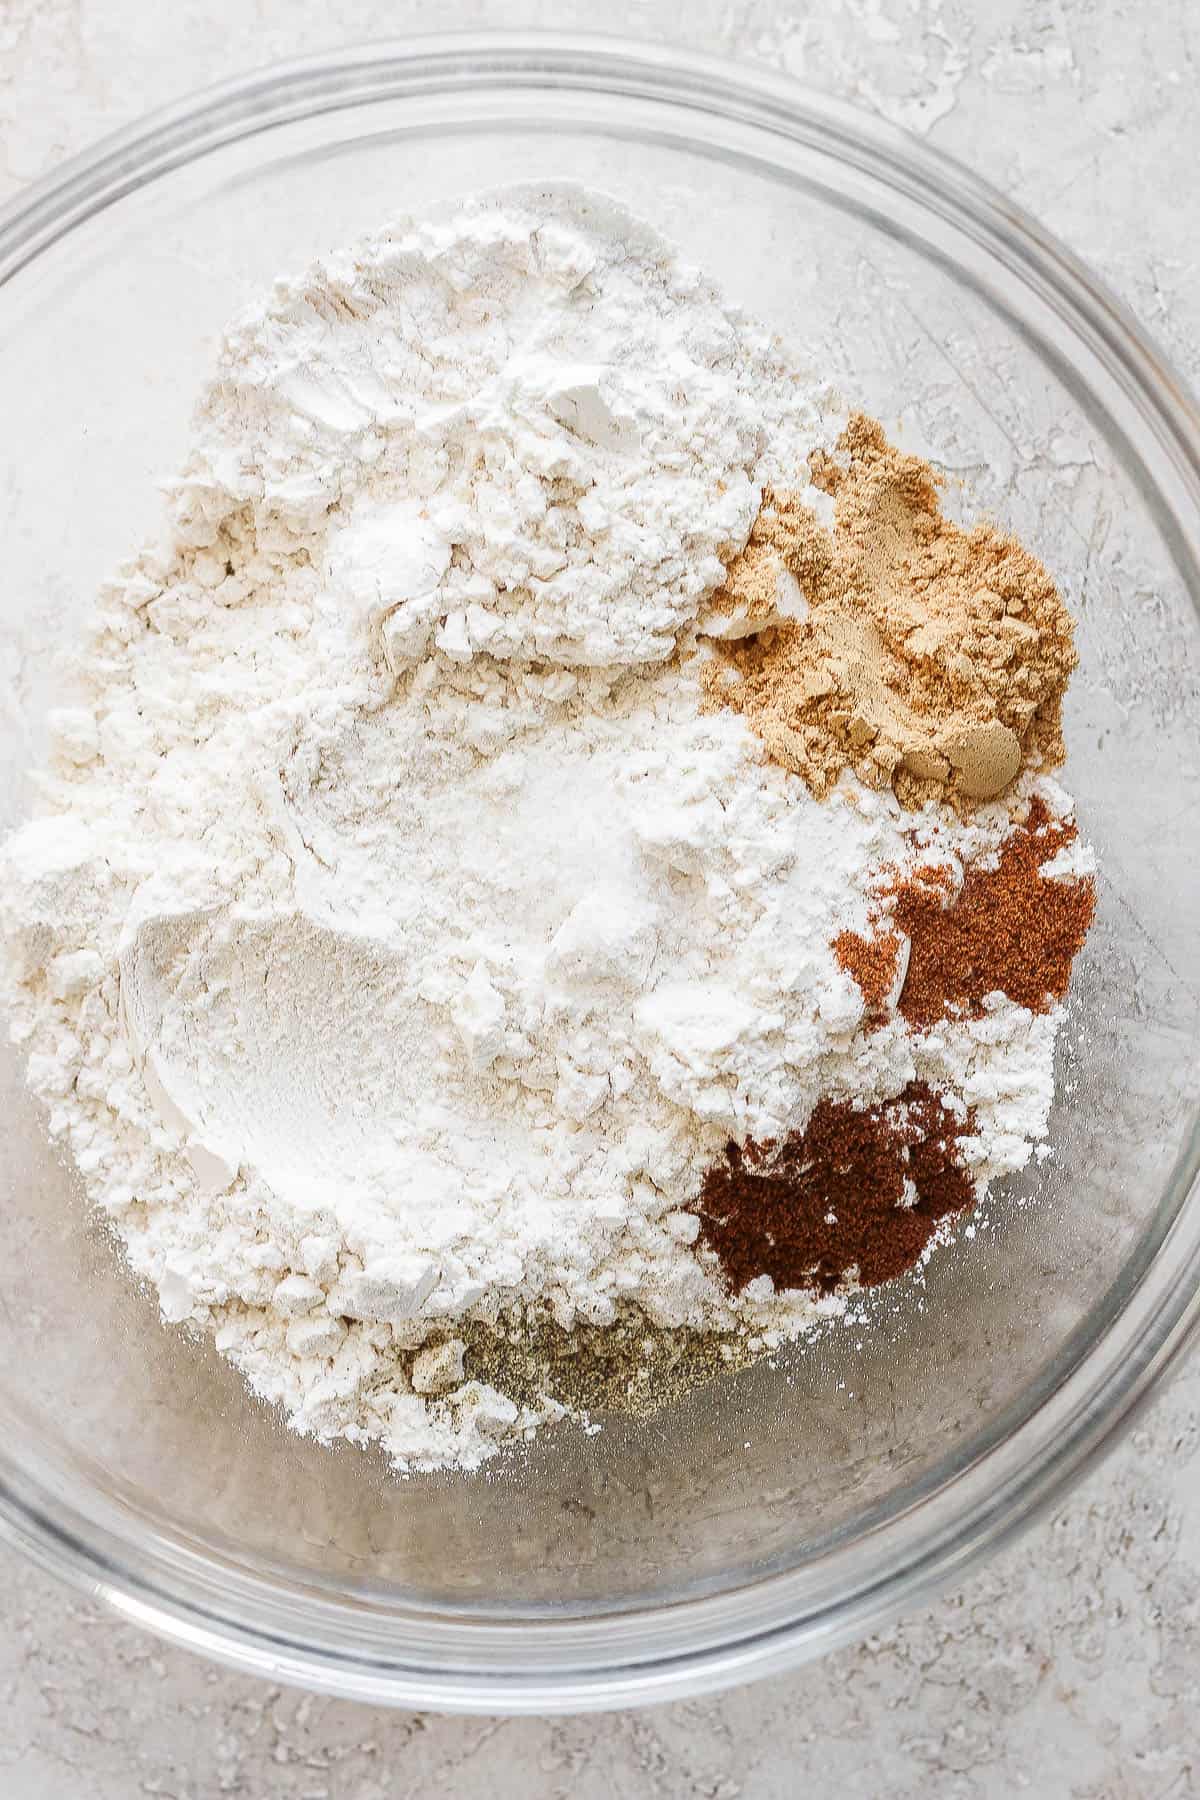 All of the dry ingredients in a bowl.